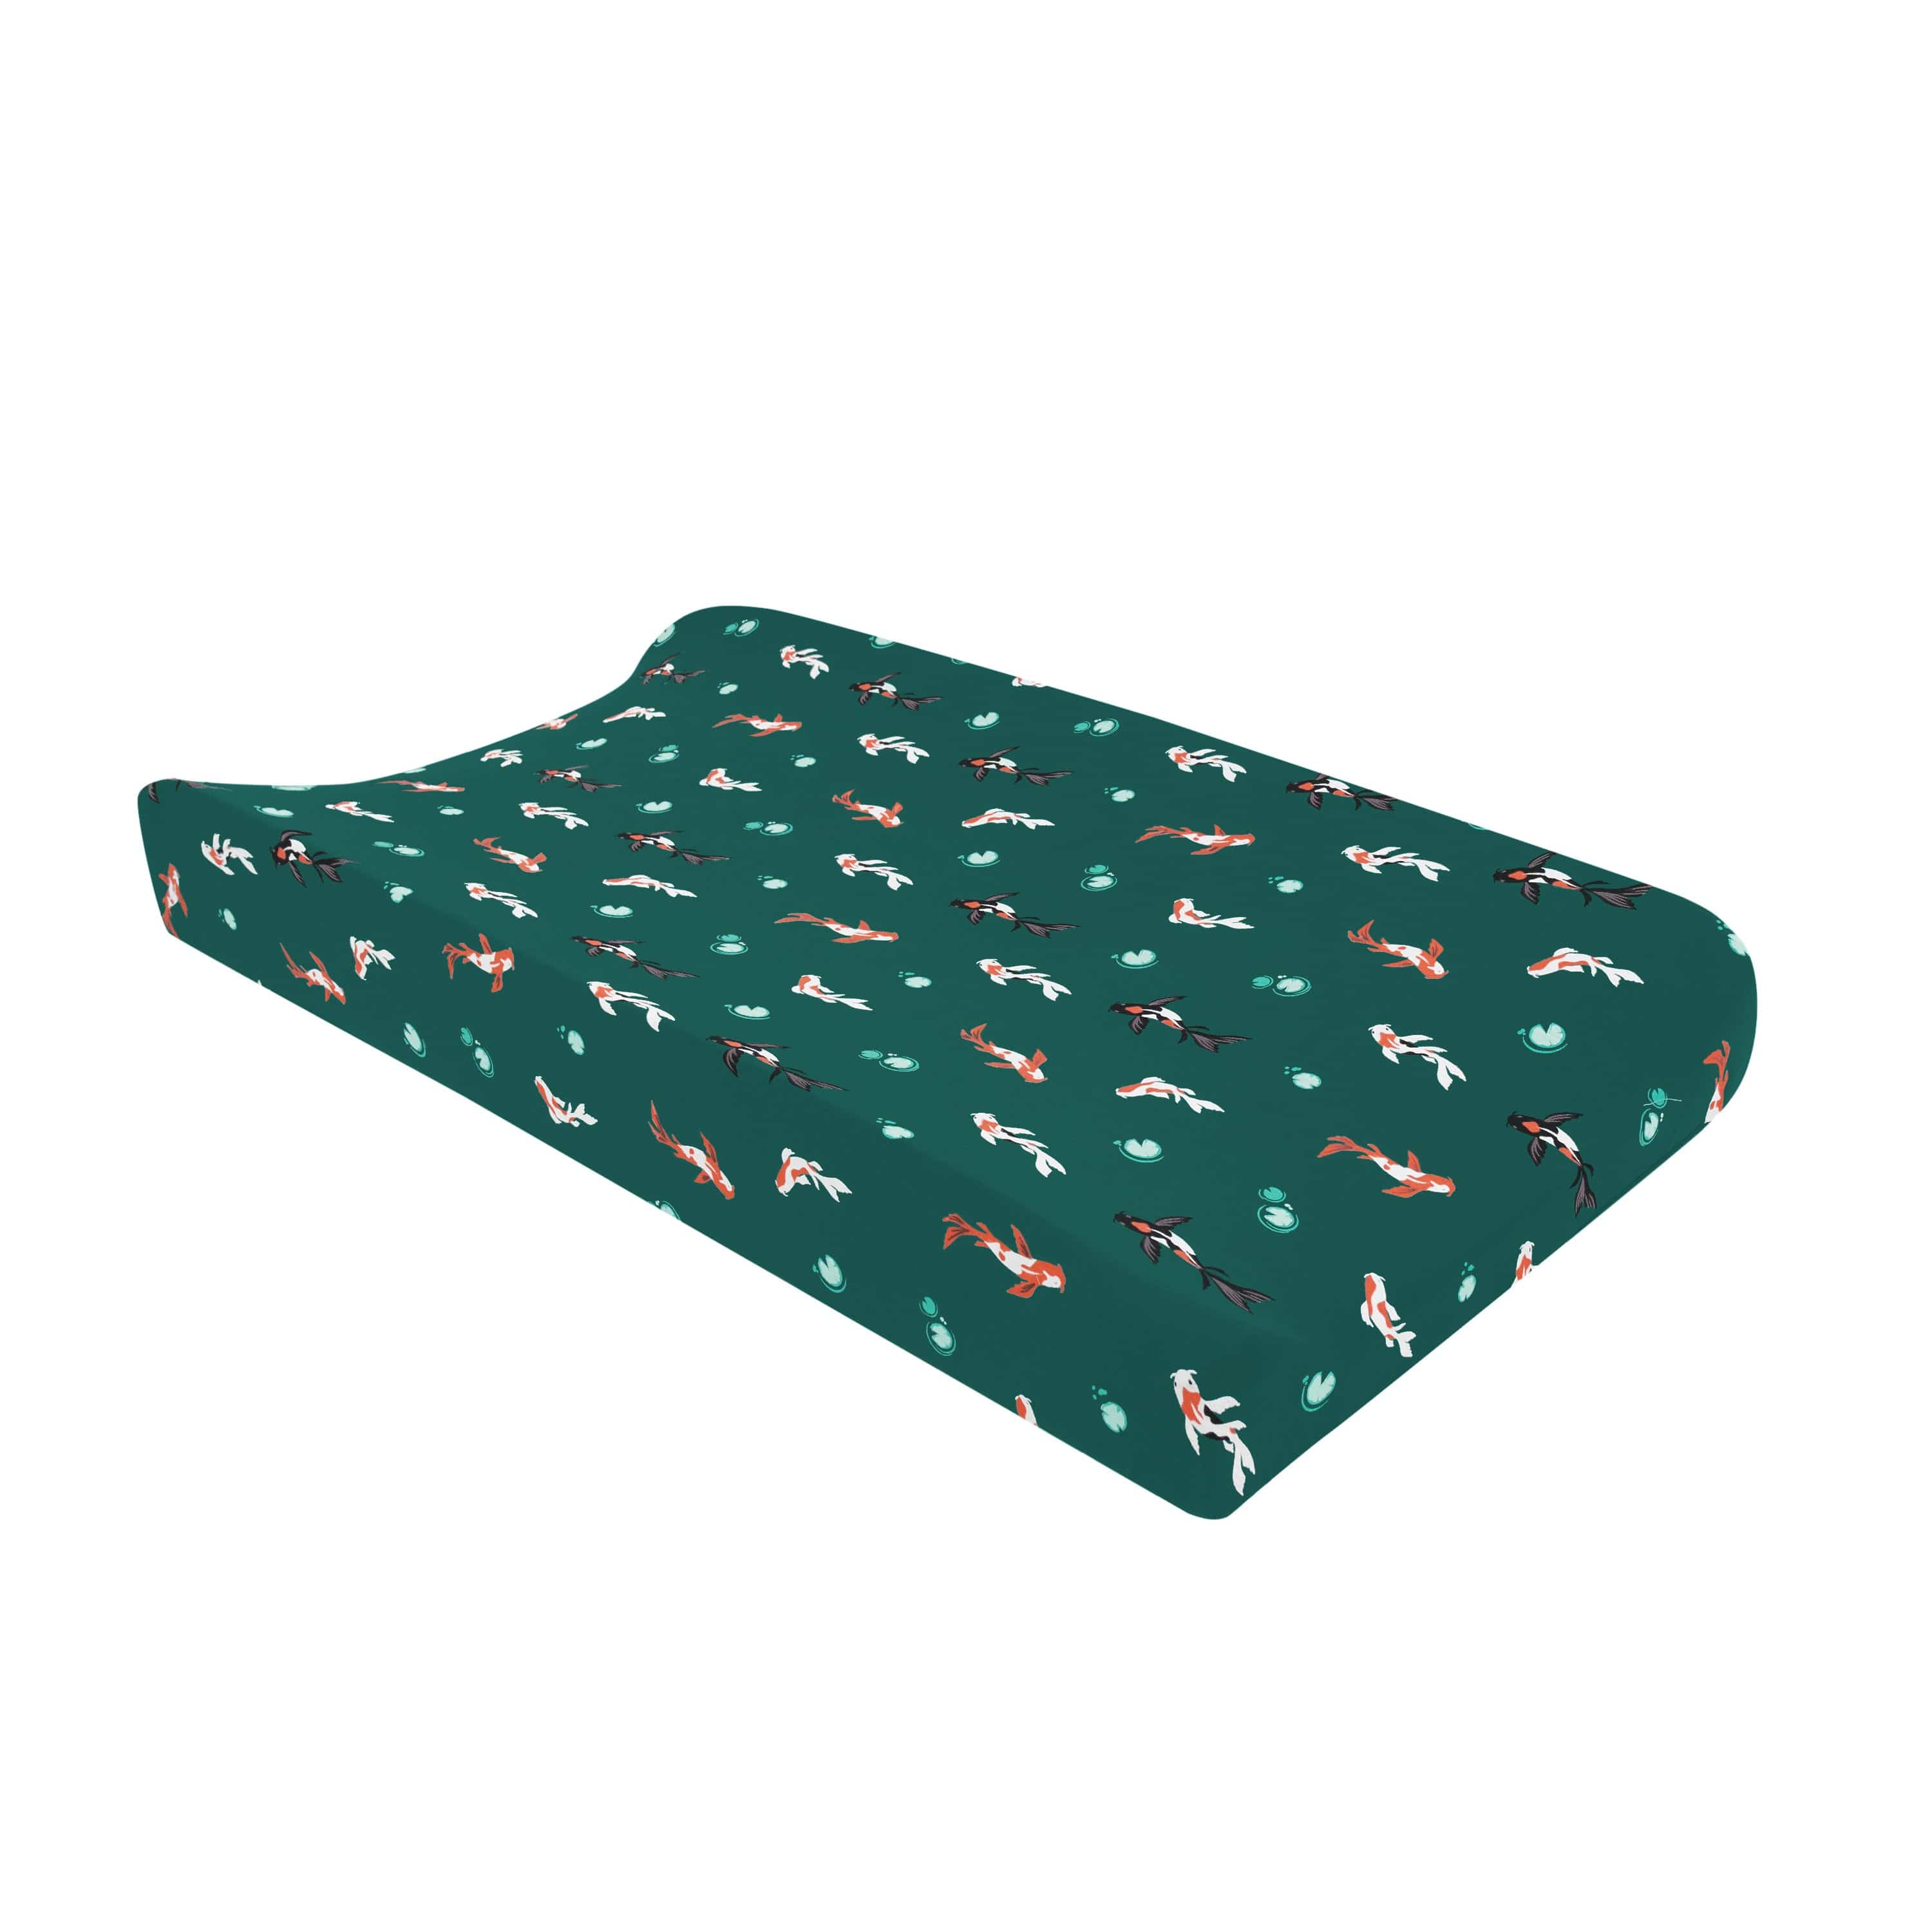 Kyte Baby Change Pad Cover Koi / One Size Change Pad Cover in Koi